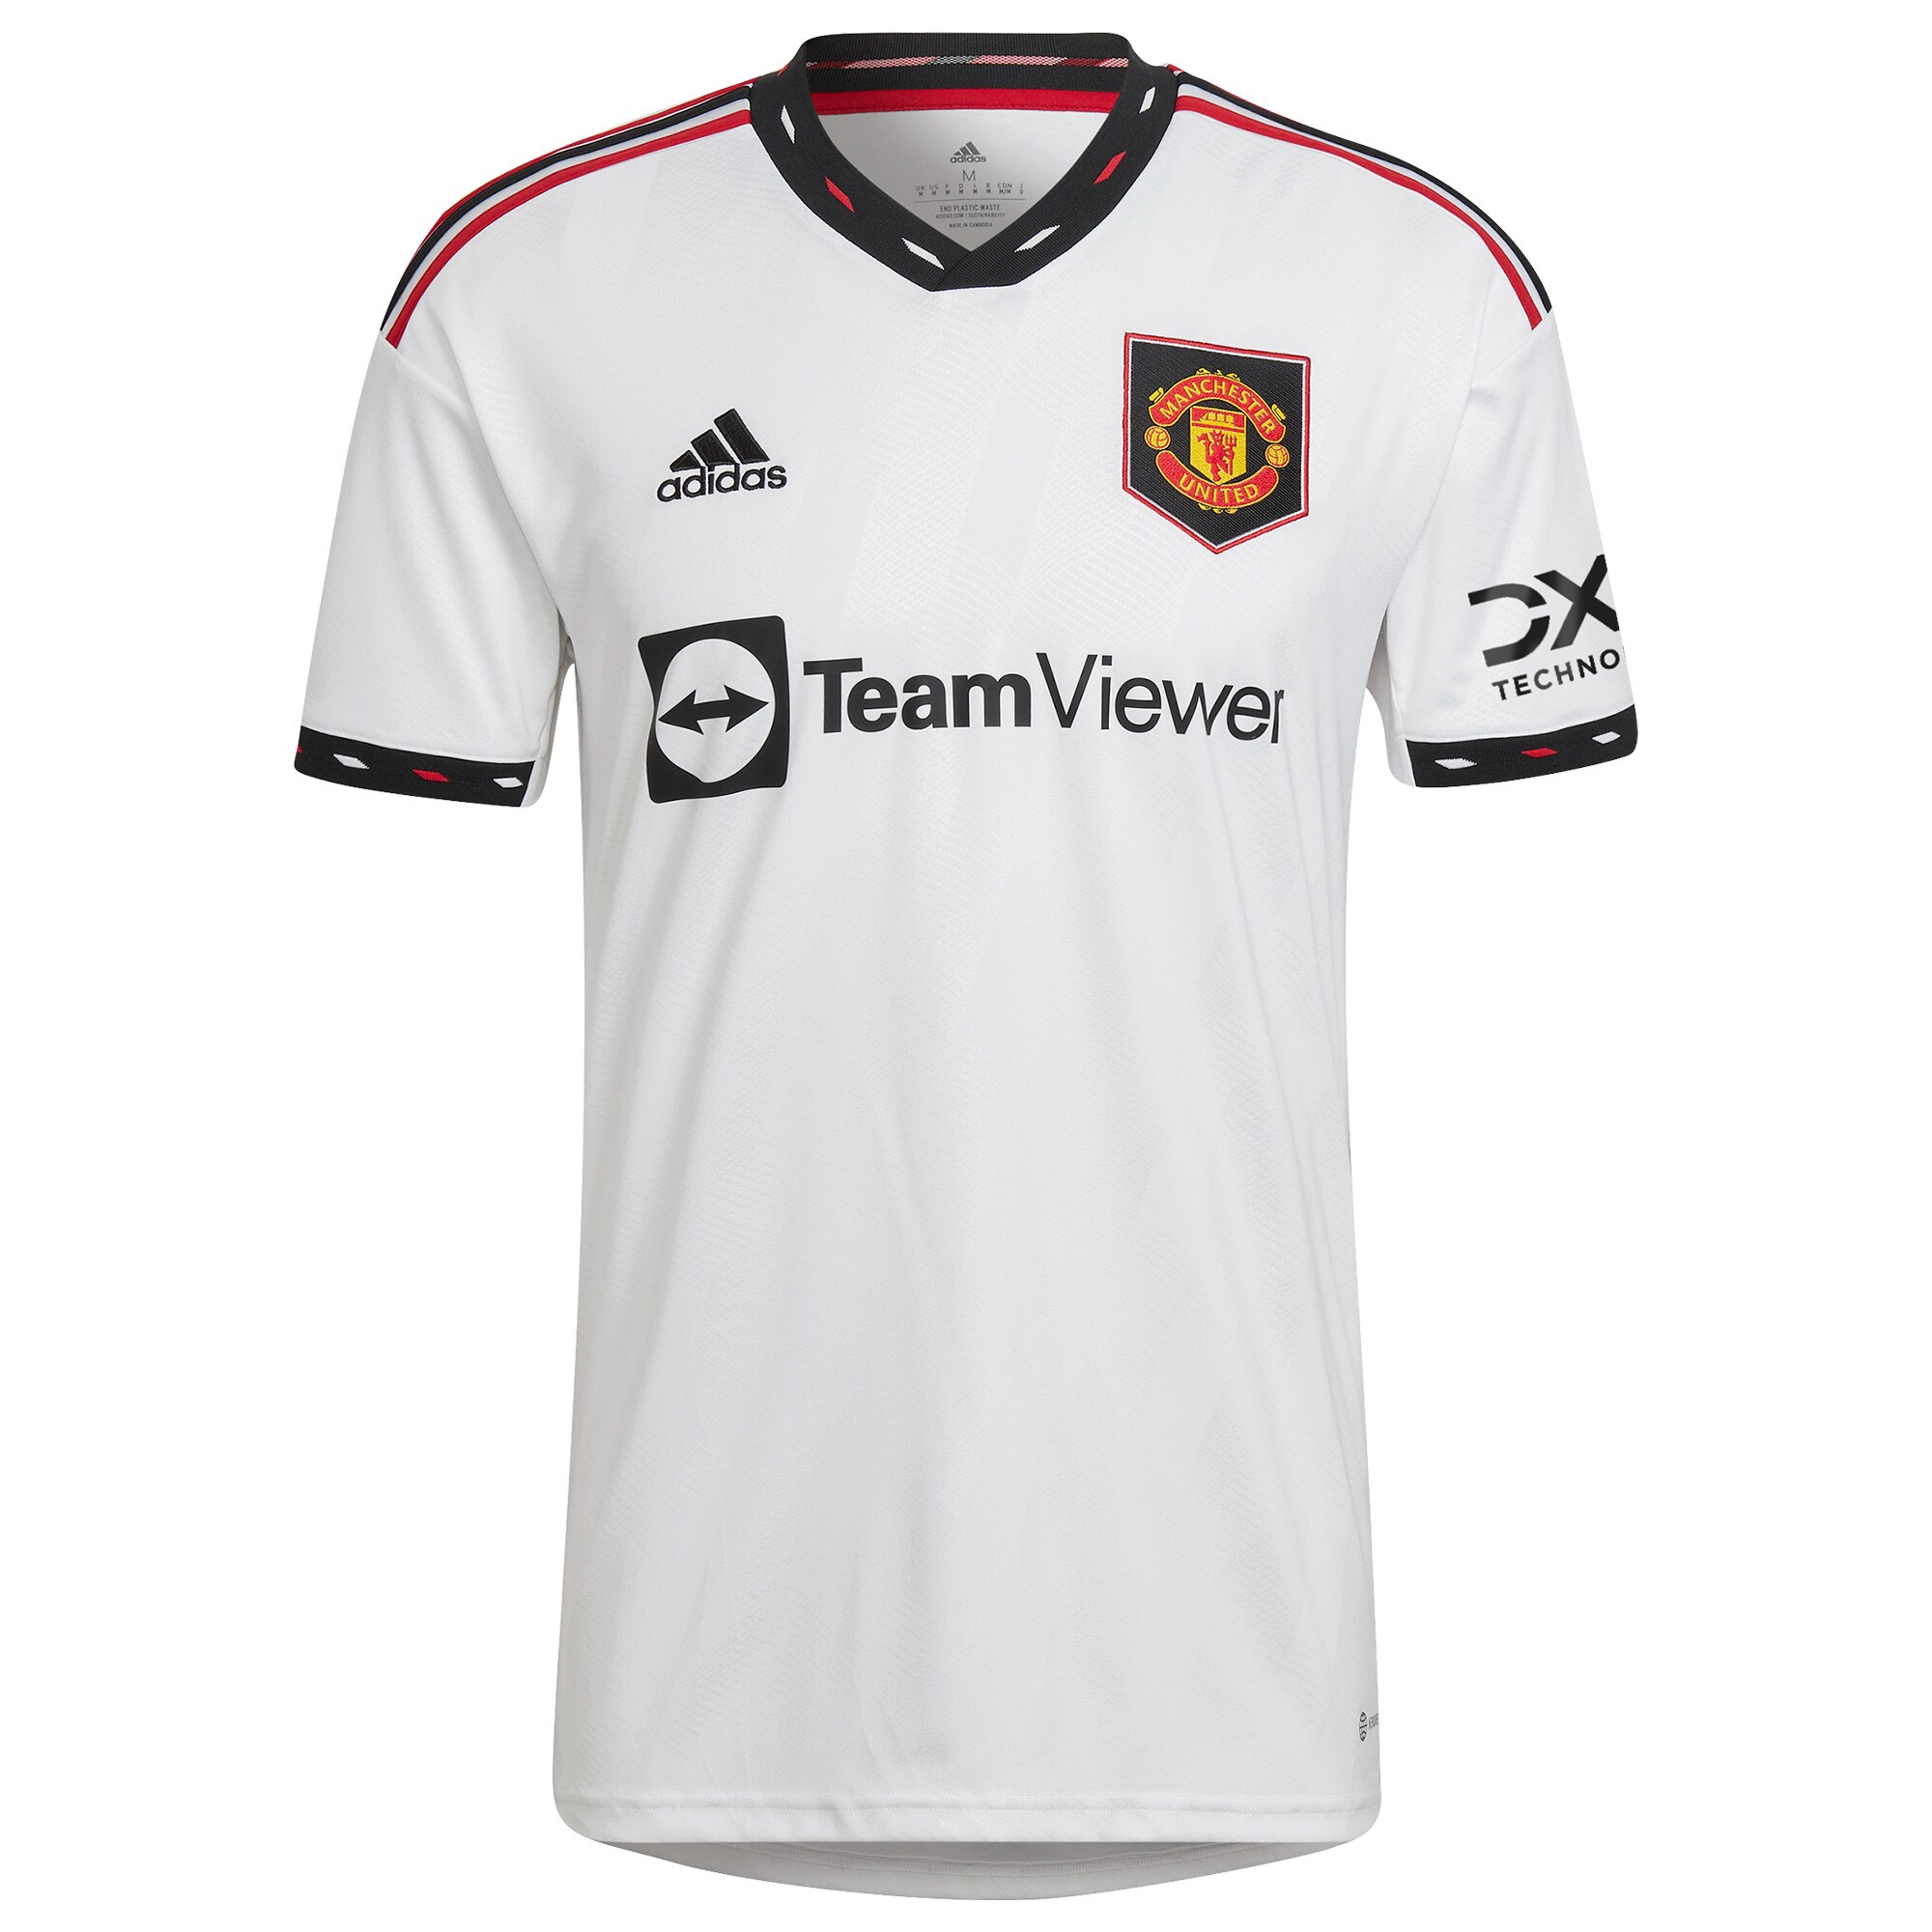 Manchester United Cup Away Shirt 2022-23 with Mannion 5 printing